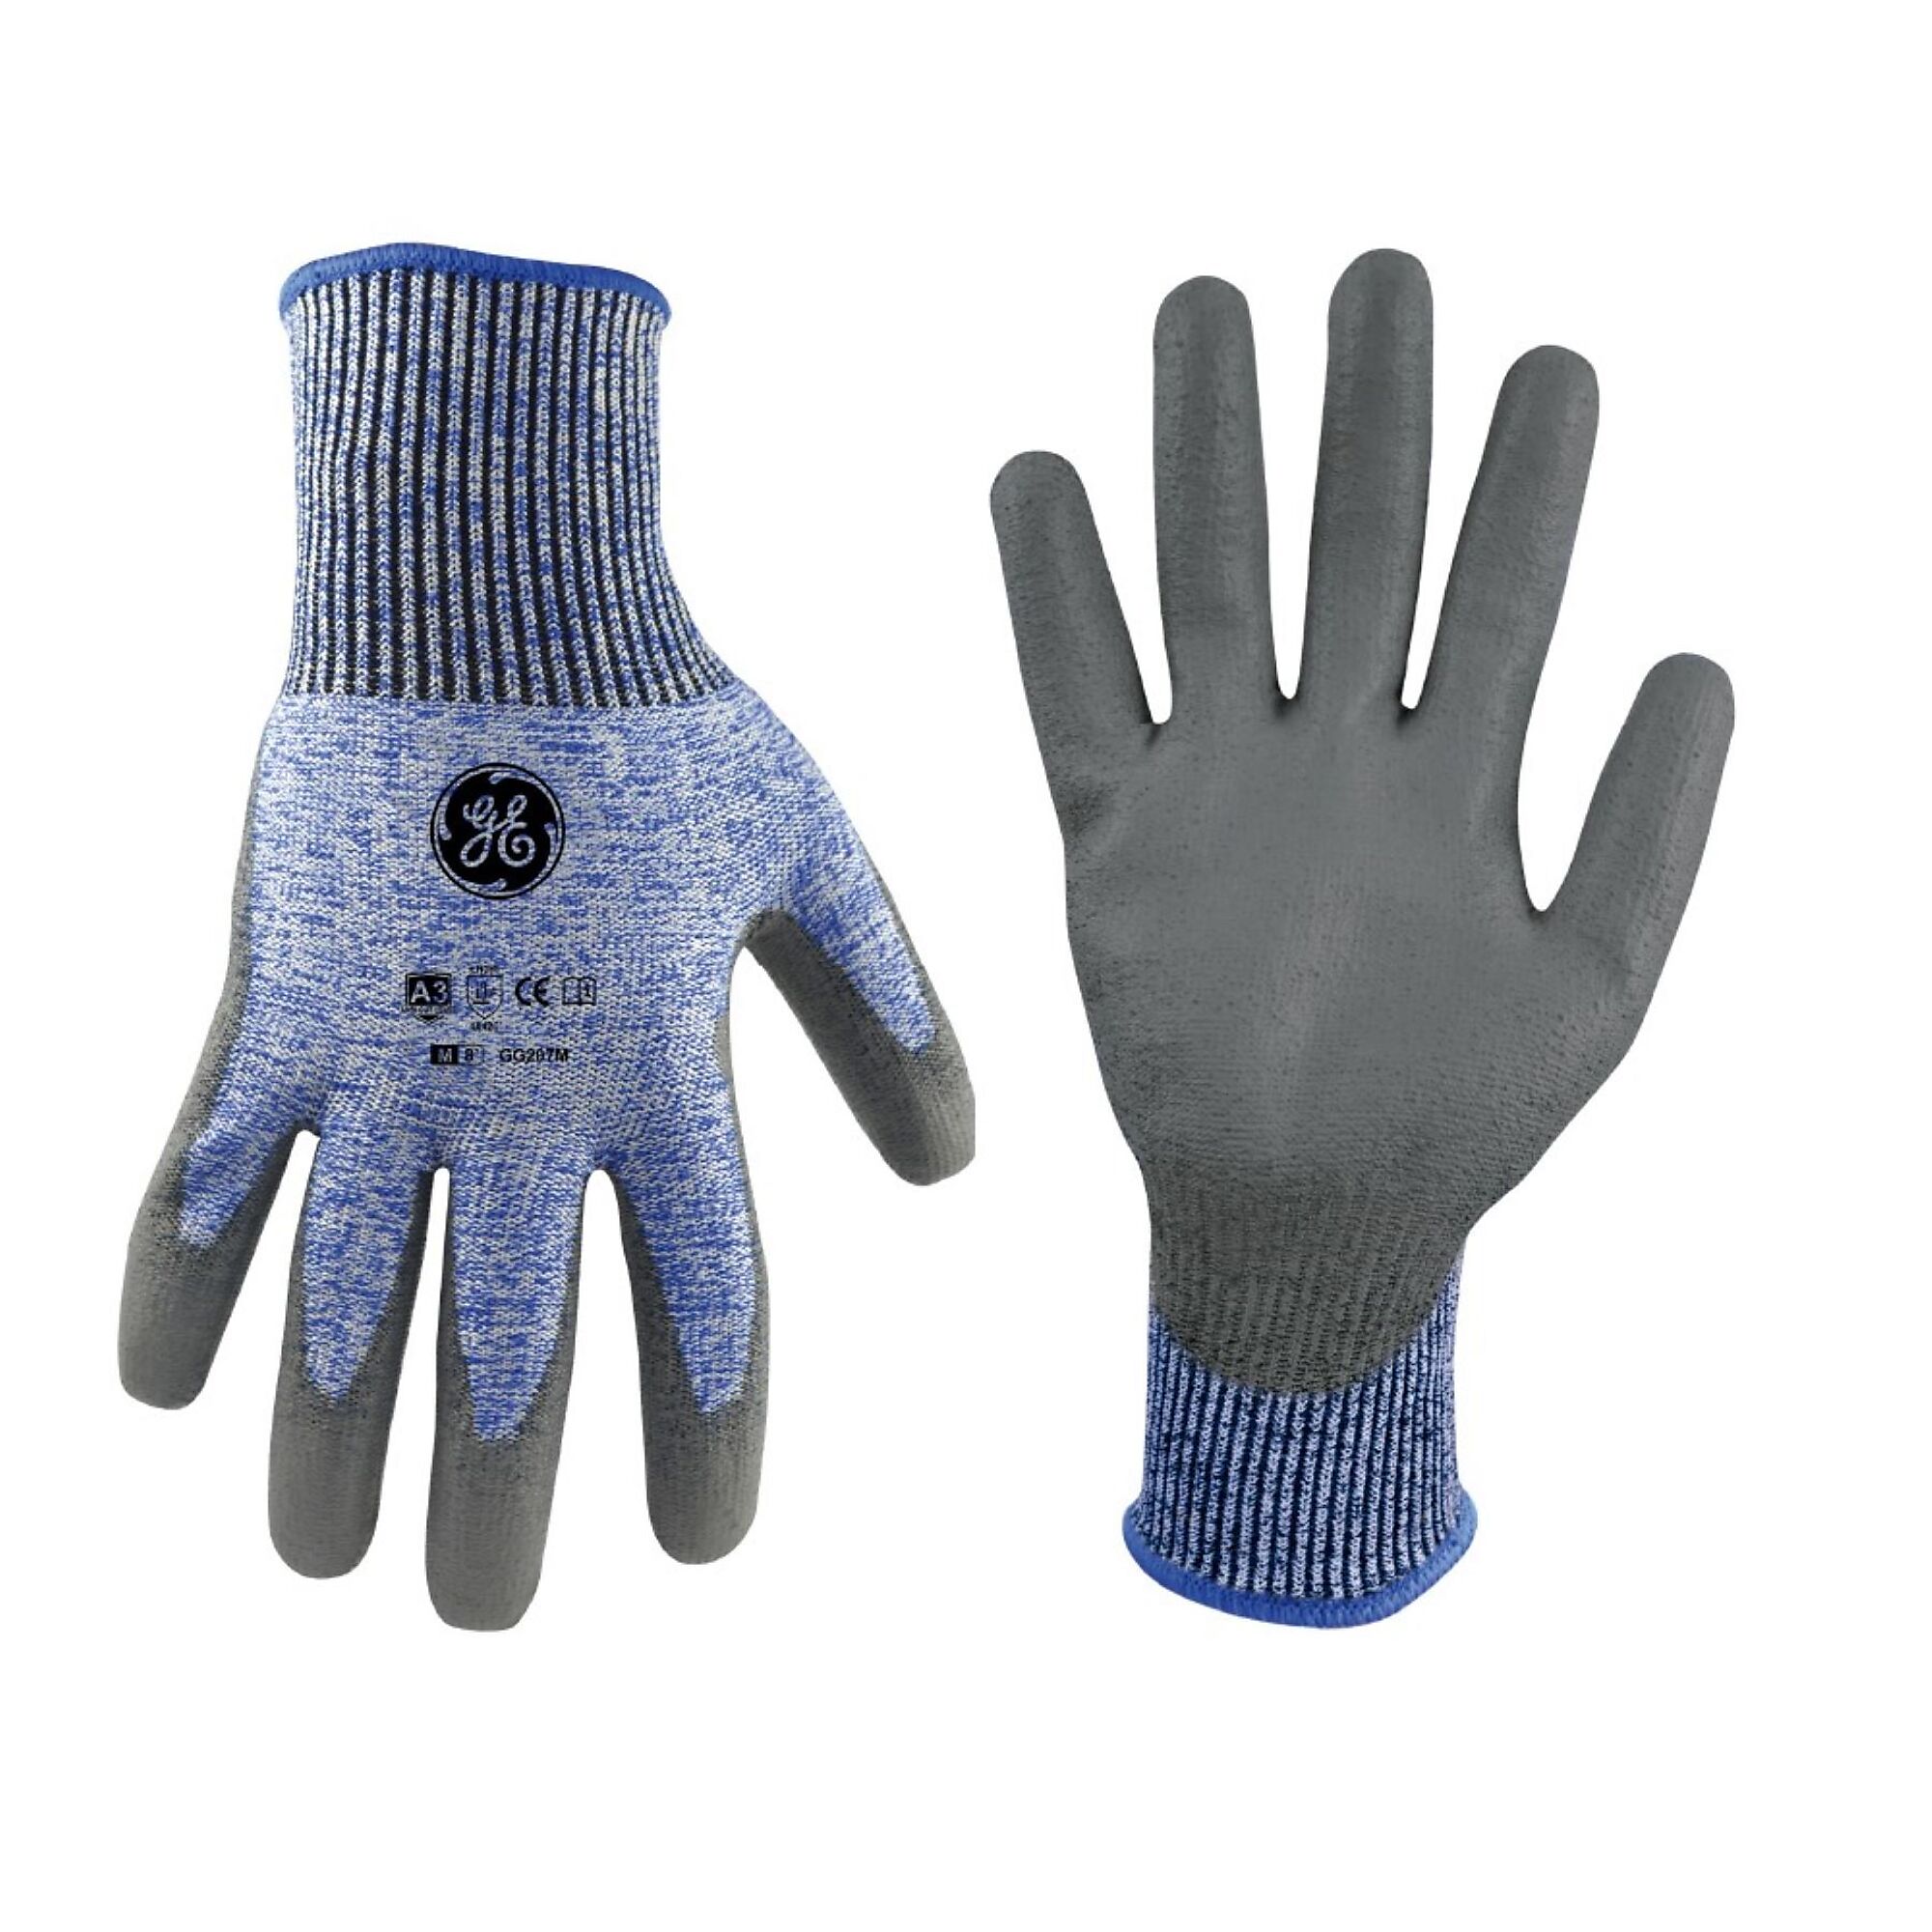 General Electric, Unisex Dipped Gloves Blue/Gray M 12 pair, Size M, Included (qty.) 12, Model GG207M